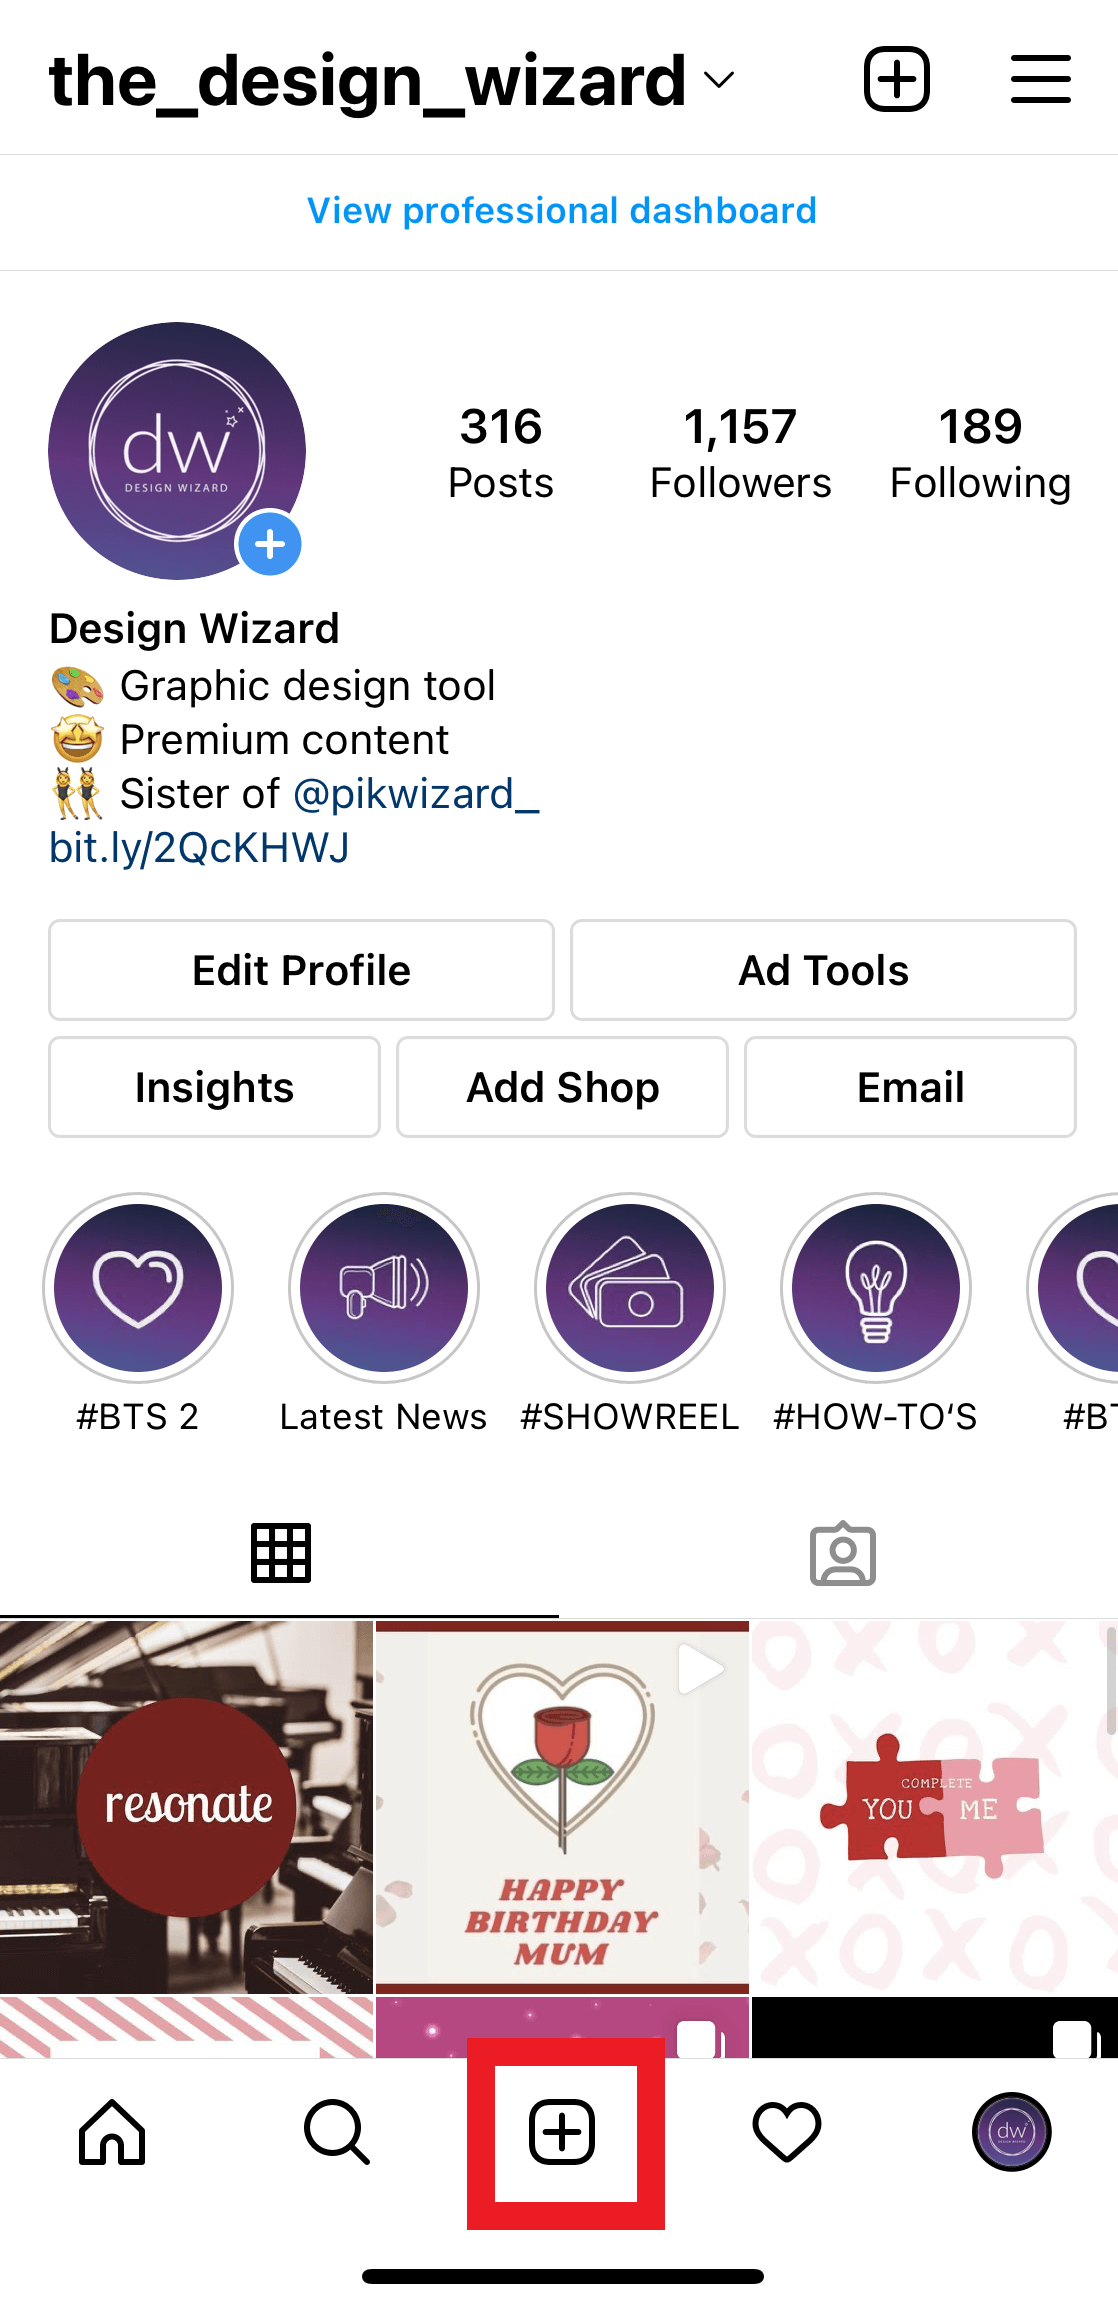 Design Wizard Instagram page - A guide on how to upload your new video on Instagram - Image